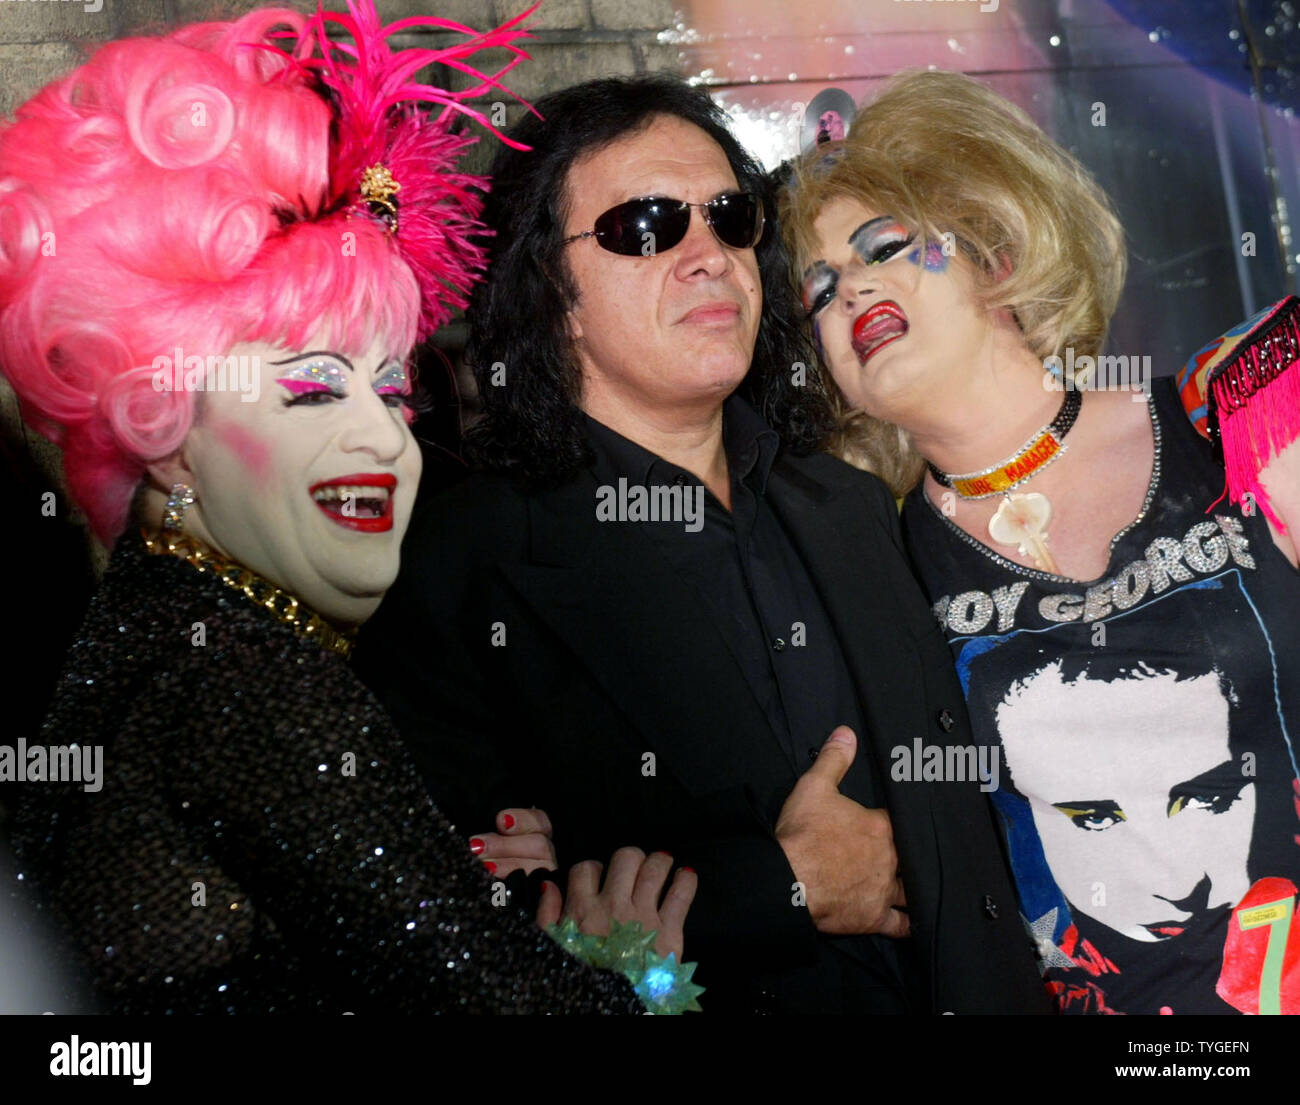 Kiss member Gene Simmons poses with a pair of drag queens as he arrives for opening night of Rosie O'Donnell's Broadway production 'Taboo' on November 13, 2003 in New York City. The play, featuring Boy George, is about the counter culture of the 1980's.  (UPI/MONIKA GRAFF) Stock Photo